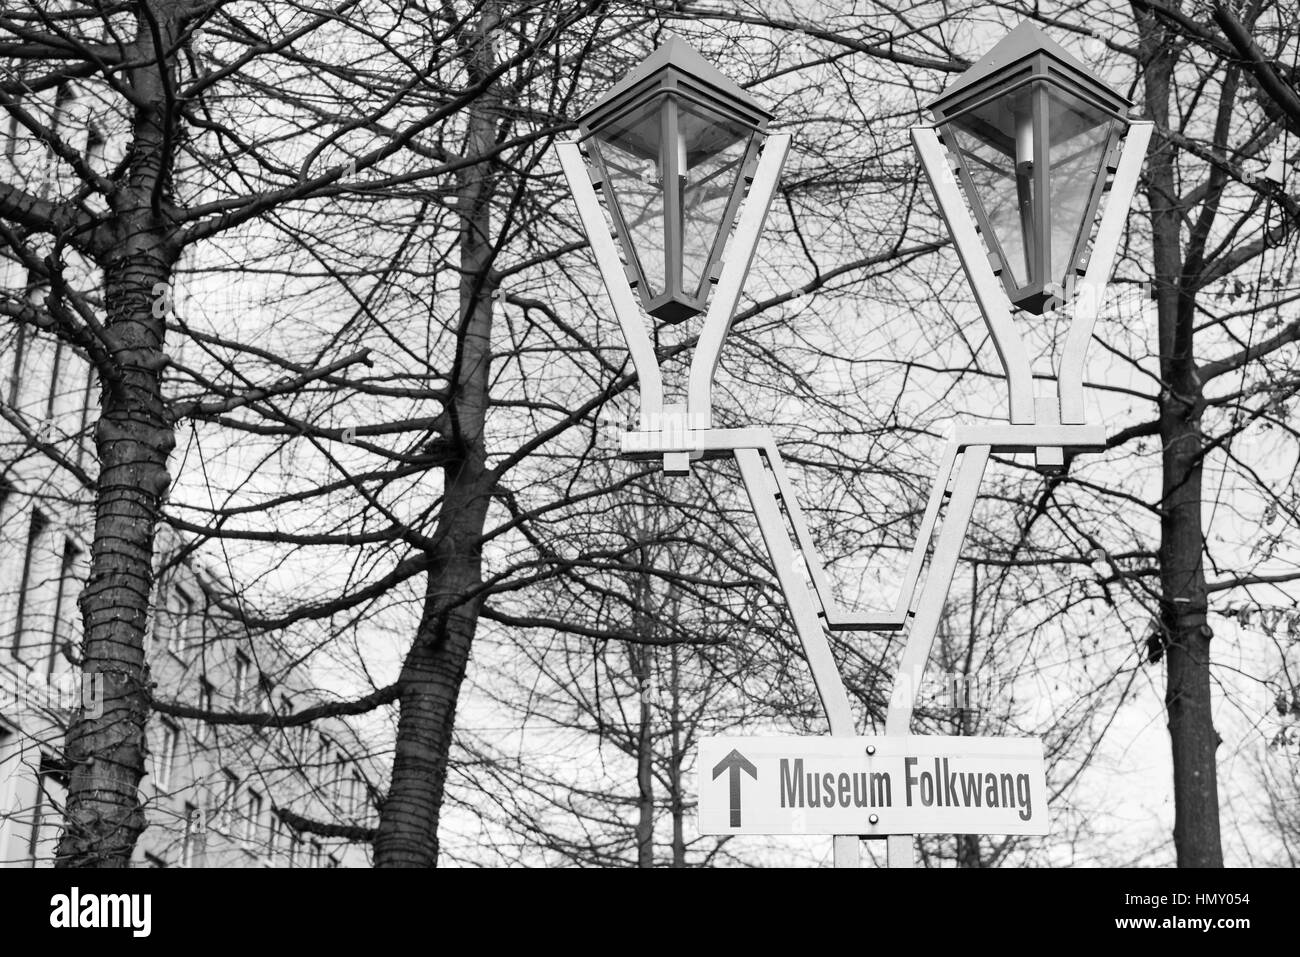 ESSEN, GERMANY - JANUARY 25, 2017: A sign guides interested people towards the famous Folkwang Museum which is in walking distance from the Rüttenscheider Stern Stock Photo